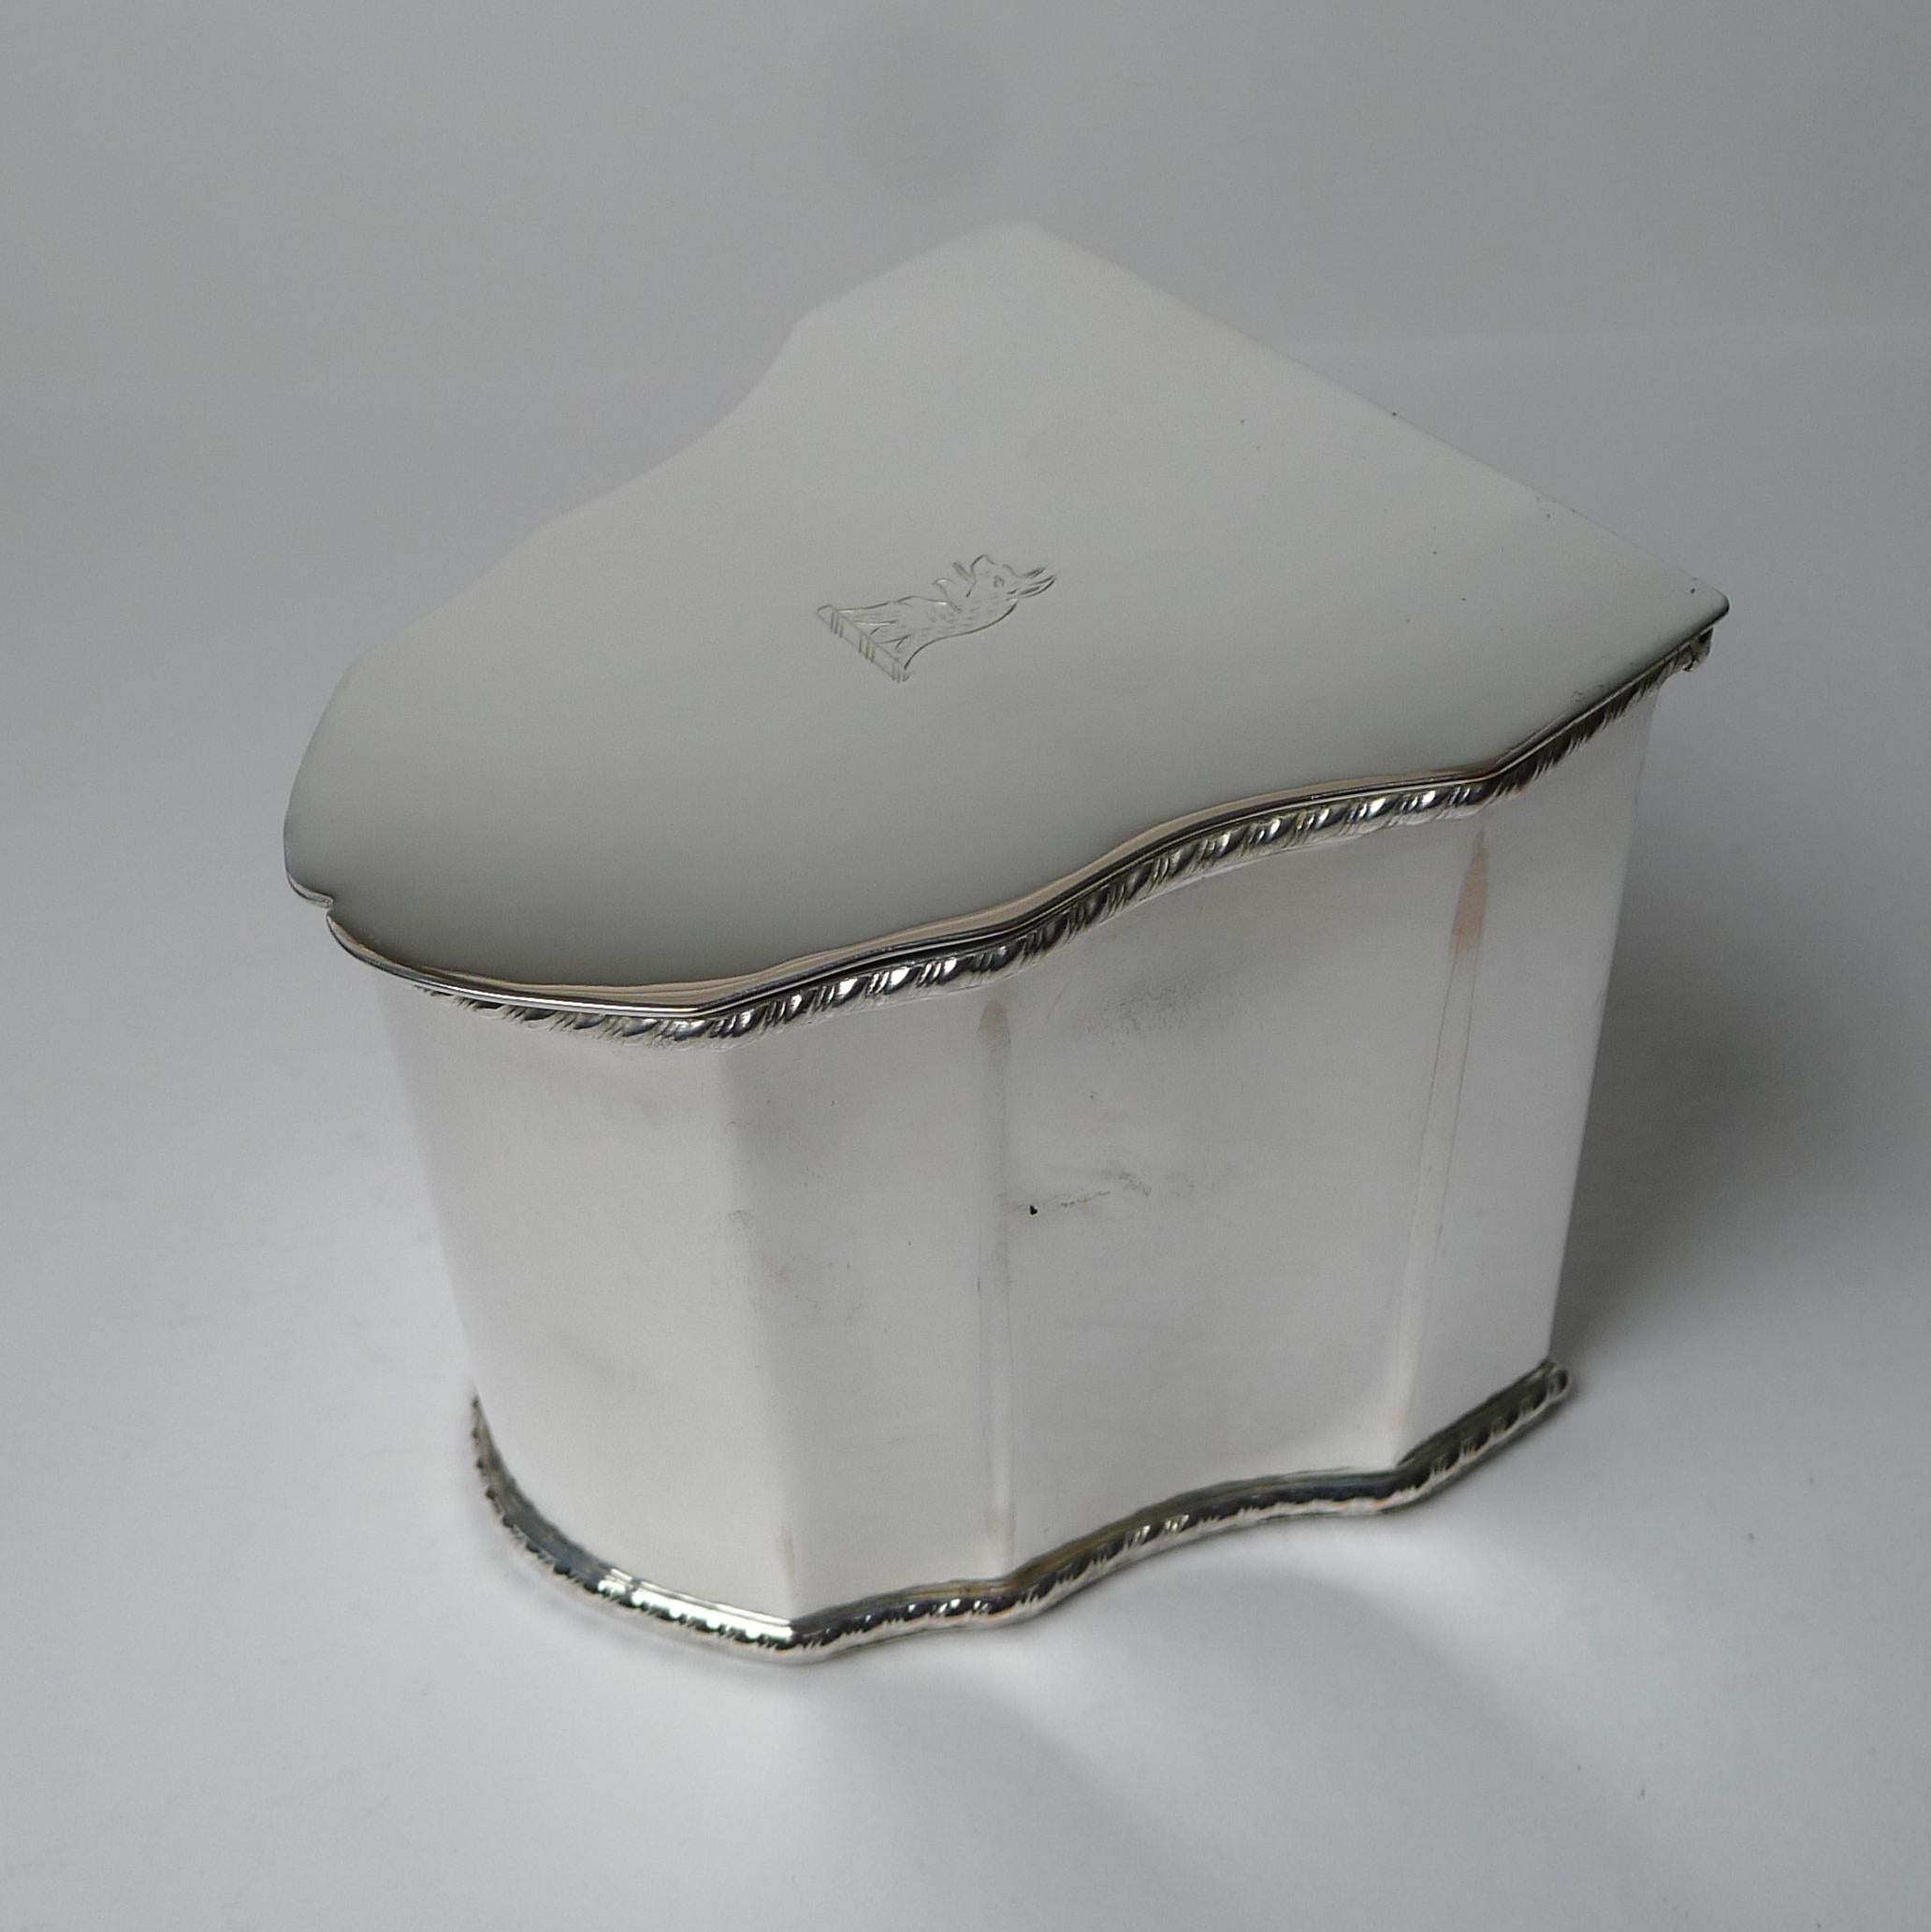 Late 19th Century Antique English Silver Plated Tea Caddy - Knife Box Shape